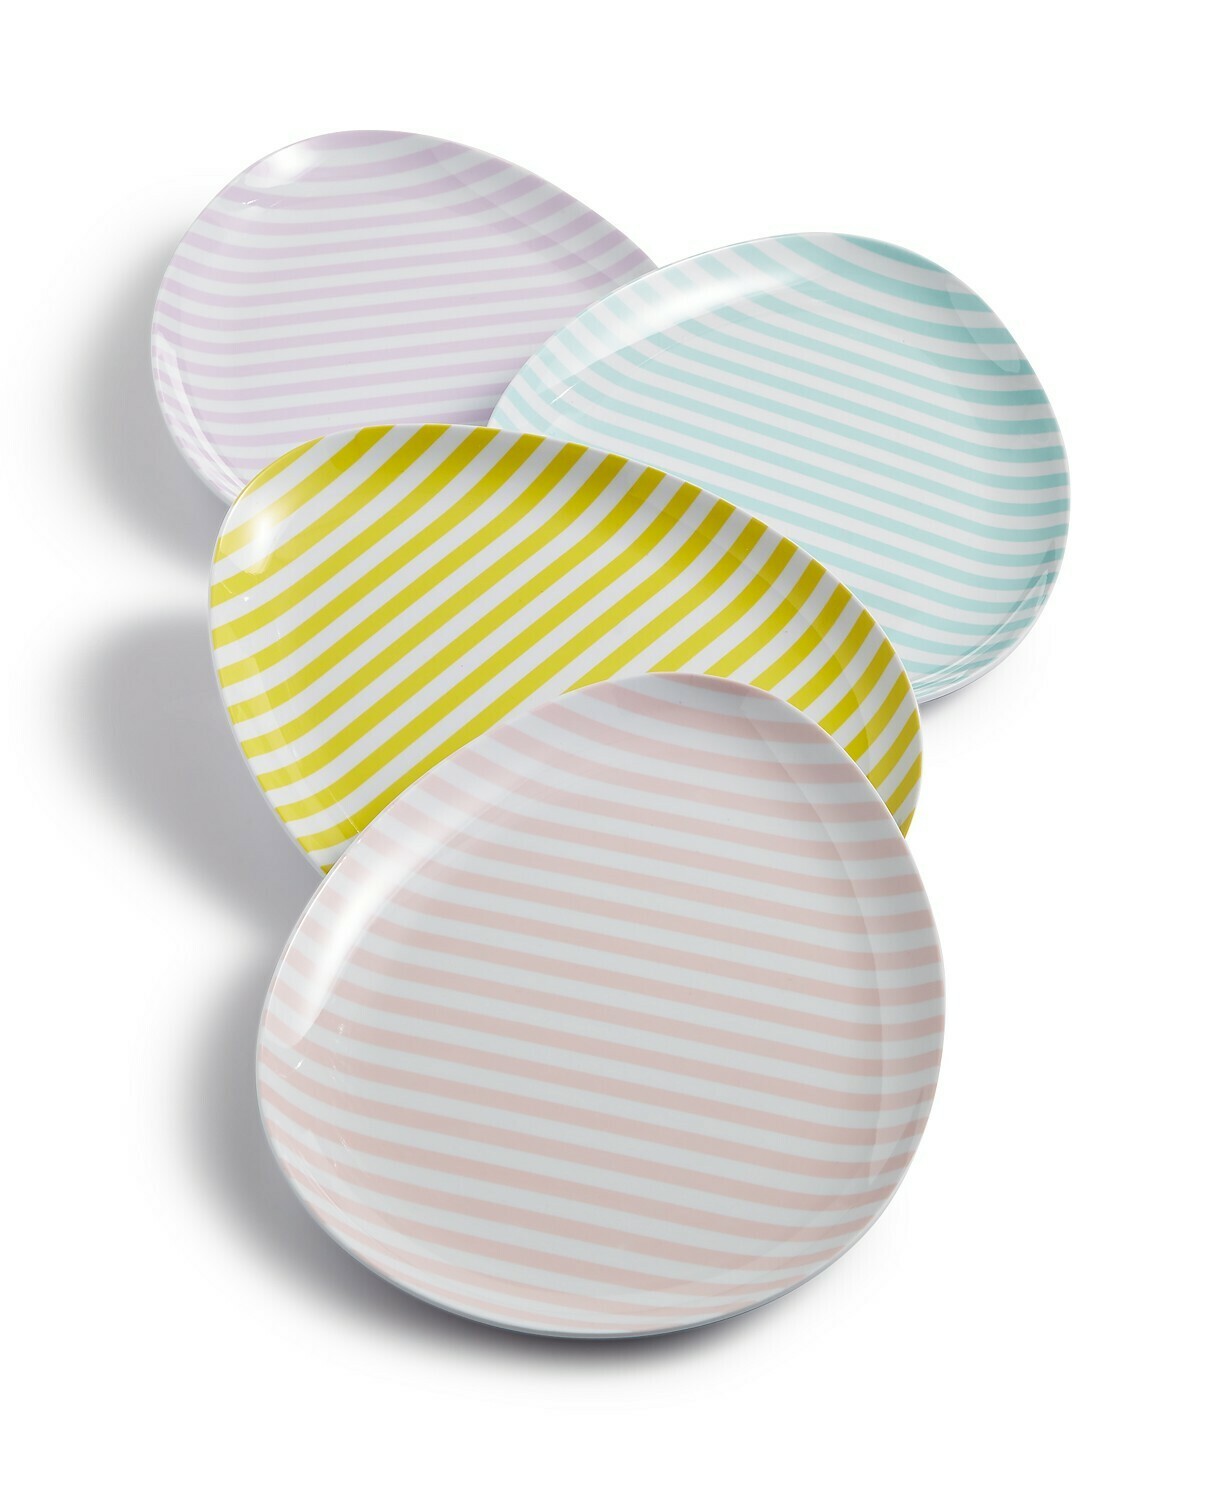 Martha Stewart Collection Egg Appetizer Plates, Service for 4